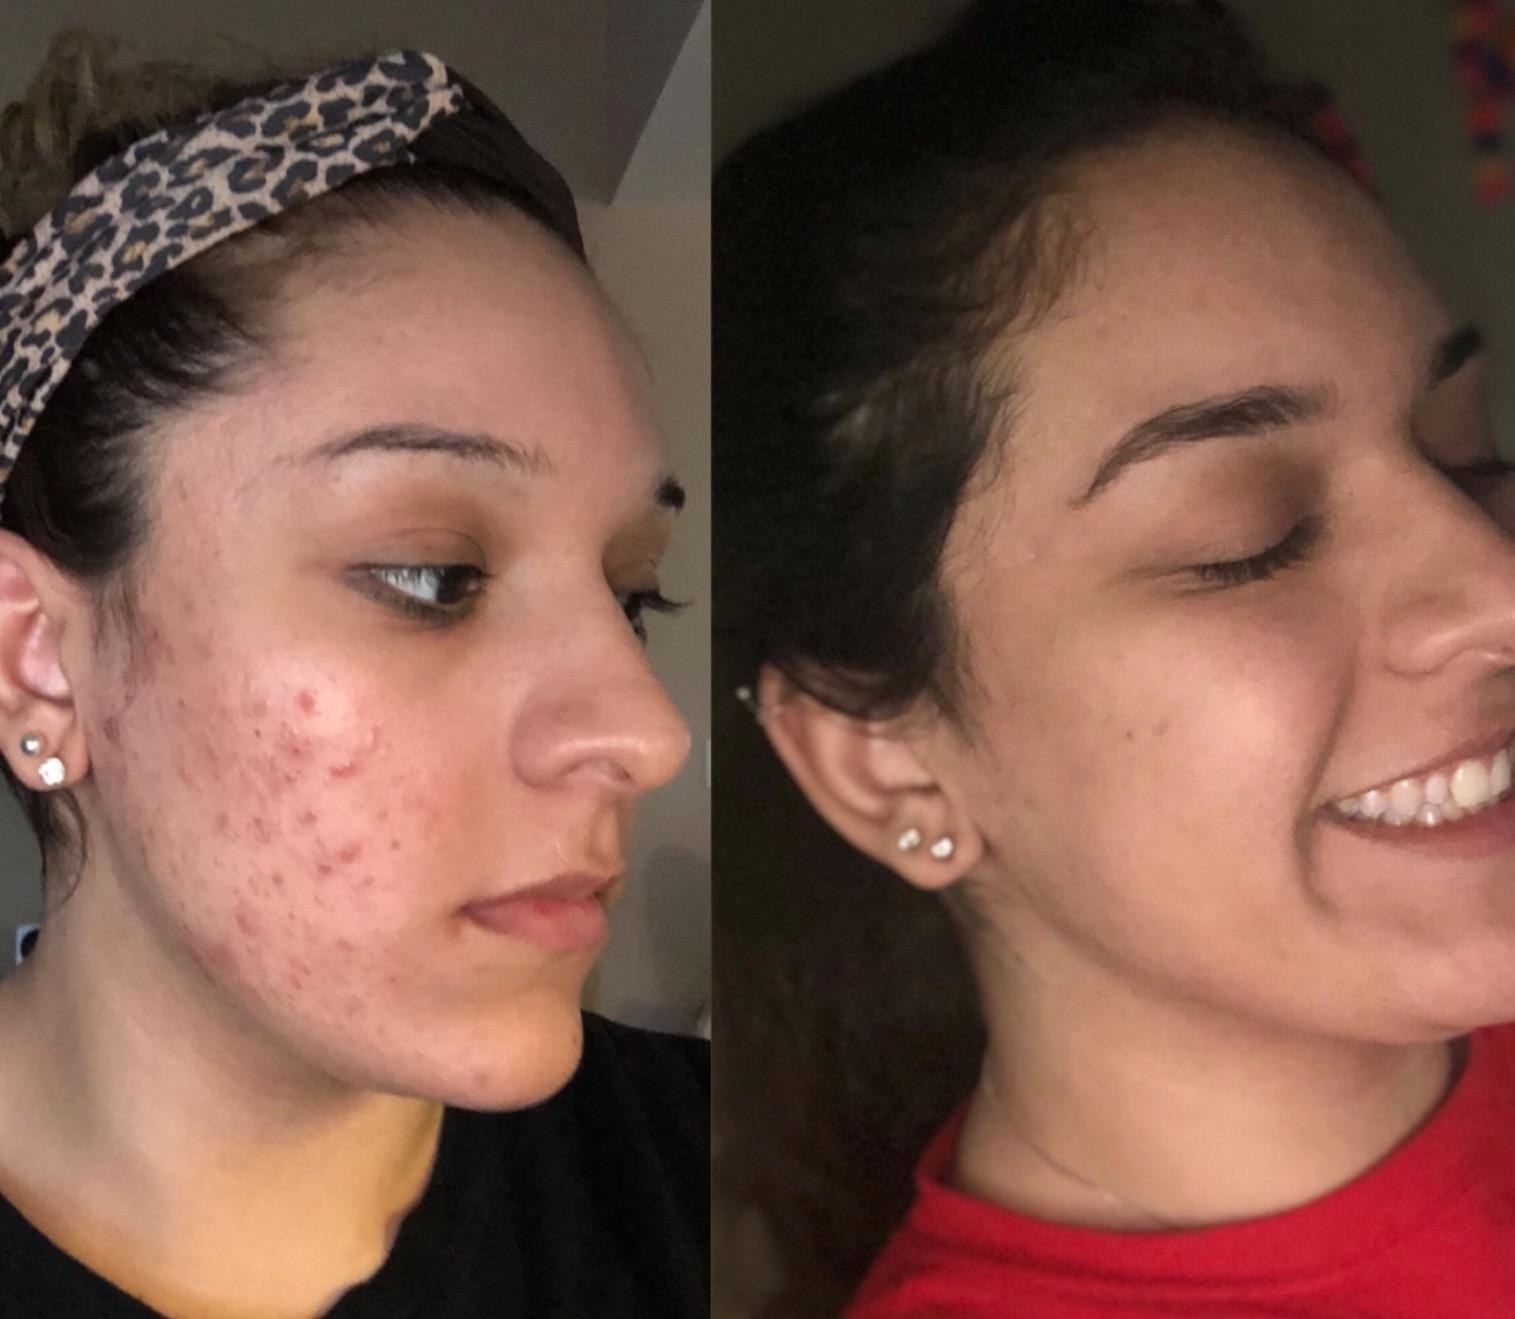 On the left, reviewer's acne-covered cheek. On the right, reviewer's clear, blemish-free skin